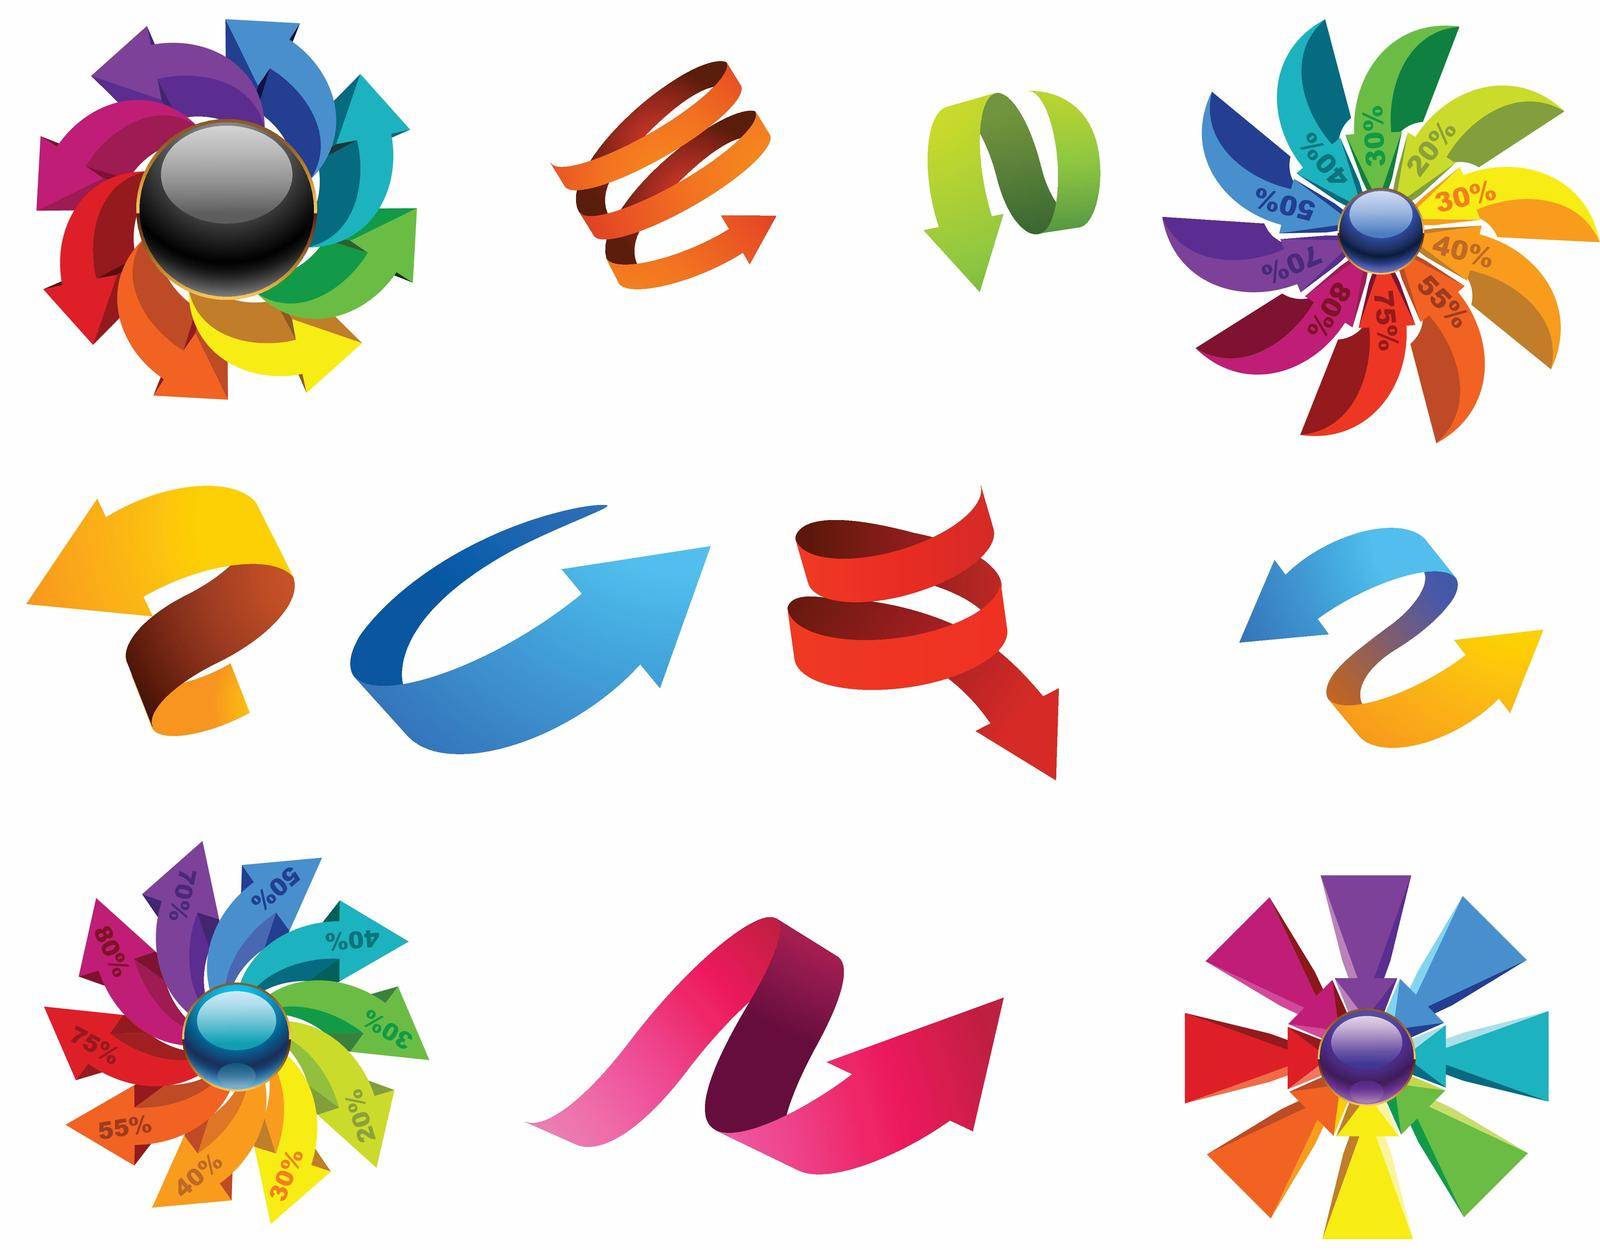 you can use colorful arrows labels vector vector to design banners, posters, backgrounds,..etc.